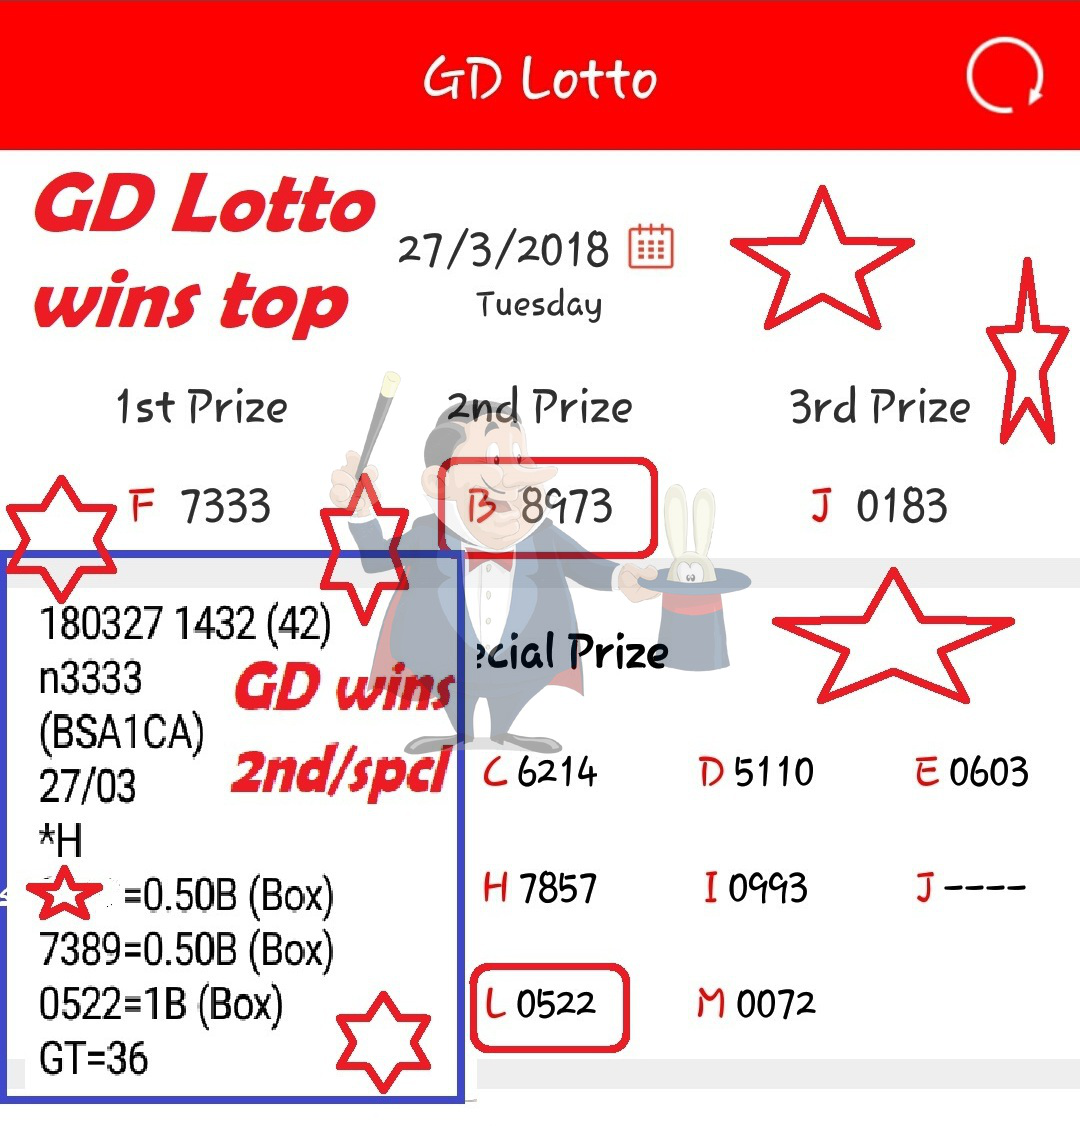 Gd lotto results